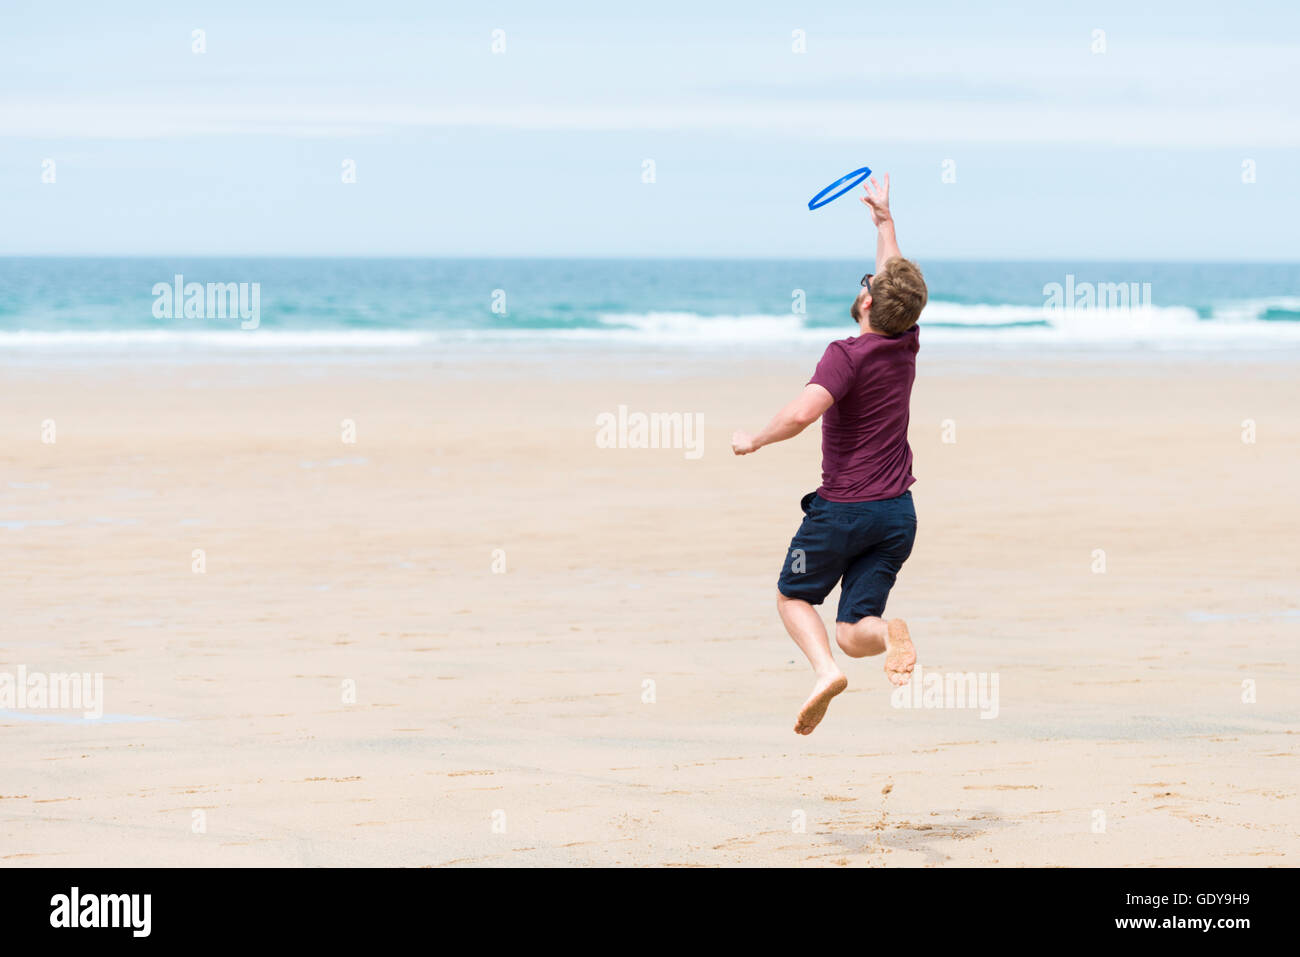 A young man playing a bat and ball game on a beach wearing casula clothes in summer UK Stock Photo